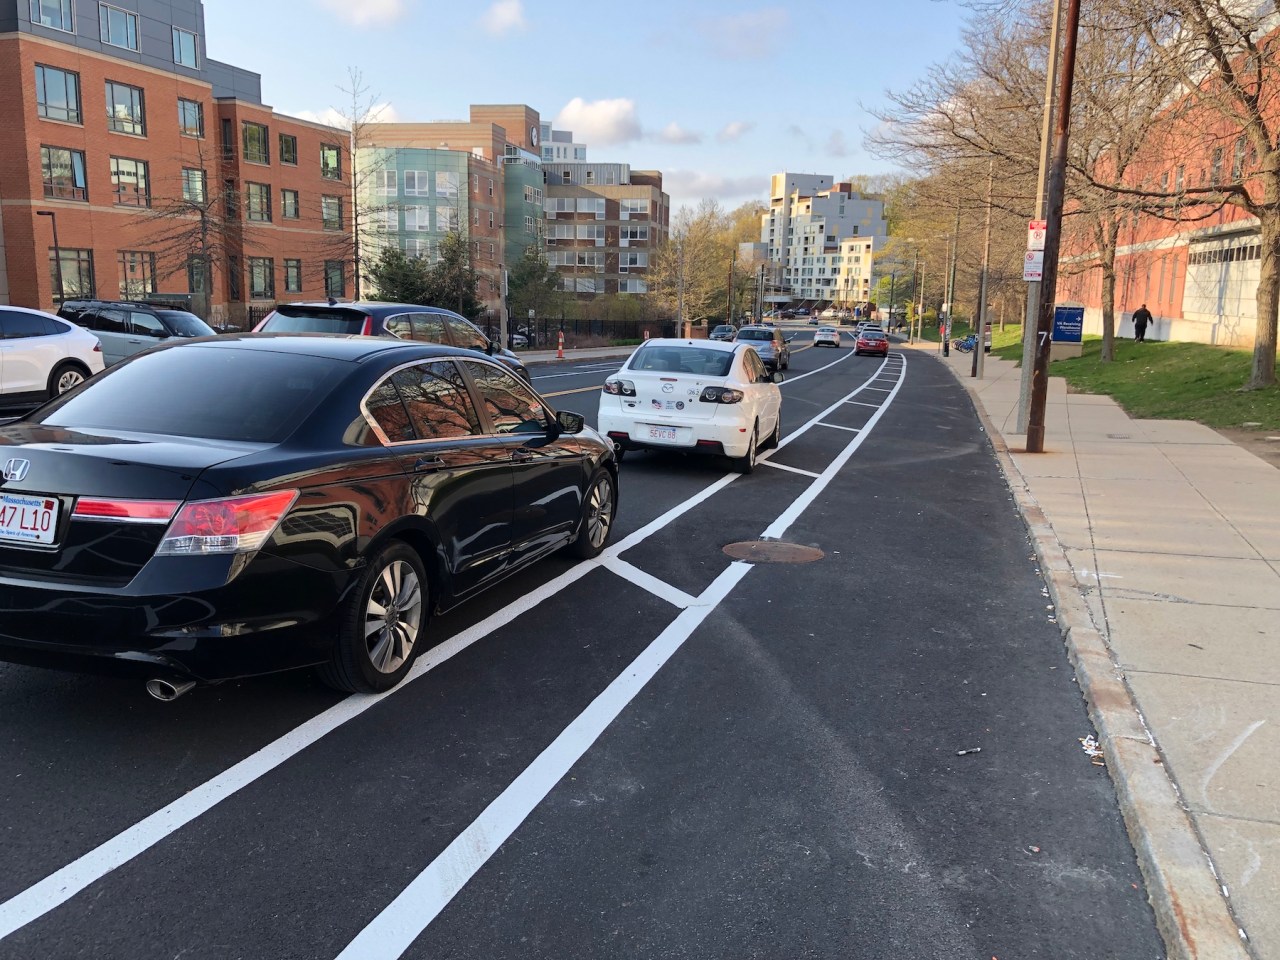 The new parking-protected bike lane on South Huntington Avenue, looking north towards Heath Street.